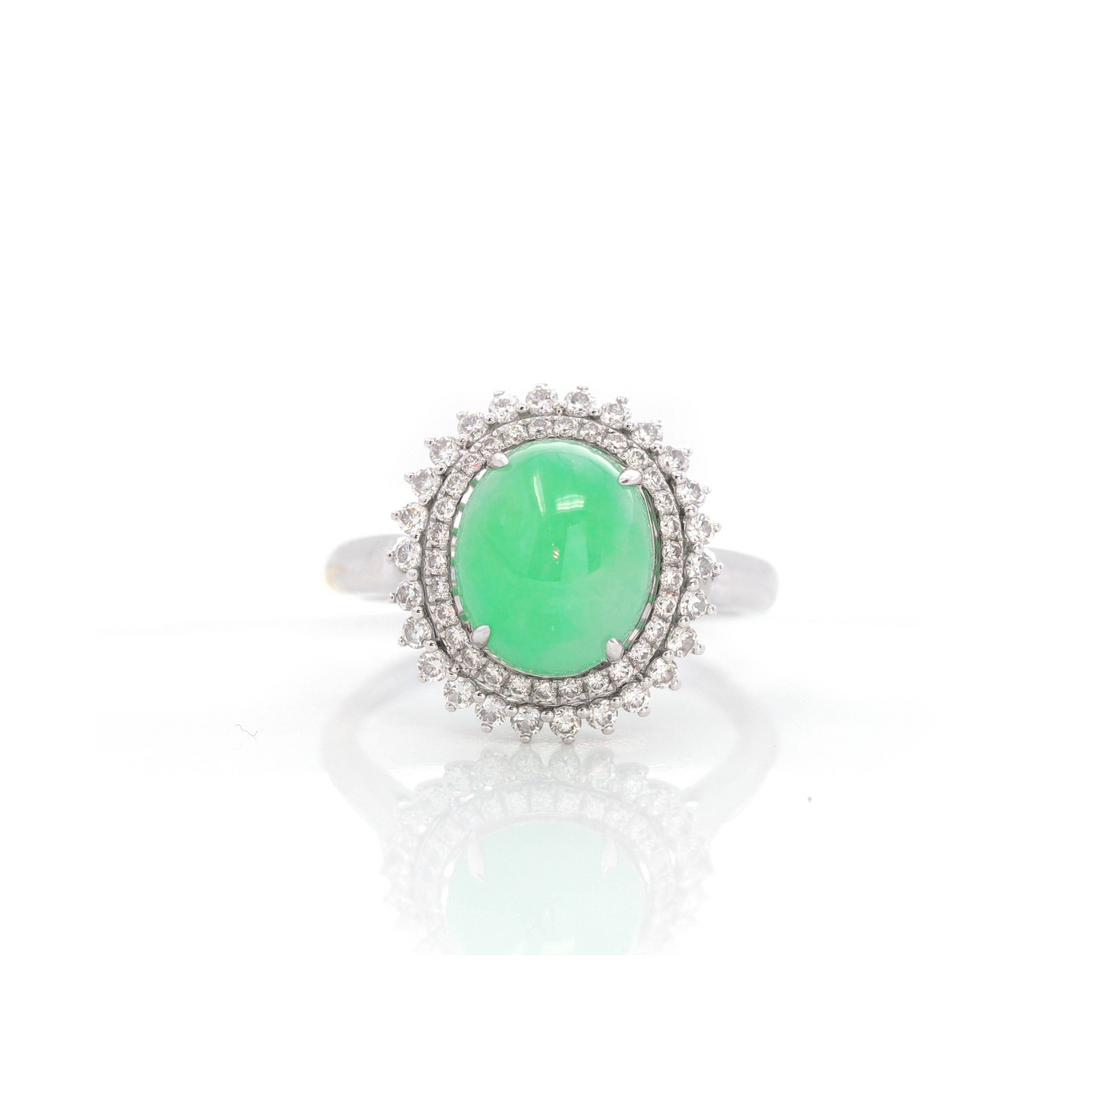 Baikalla Jewelry Jadeite Engagement Ring 18k White Gold Natural Imperial Green Jadeite Engagement Ring With Diamonds